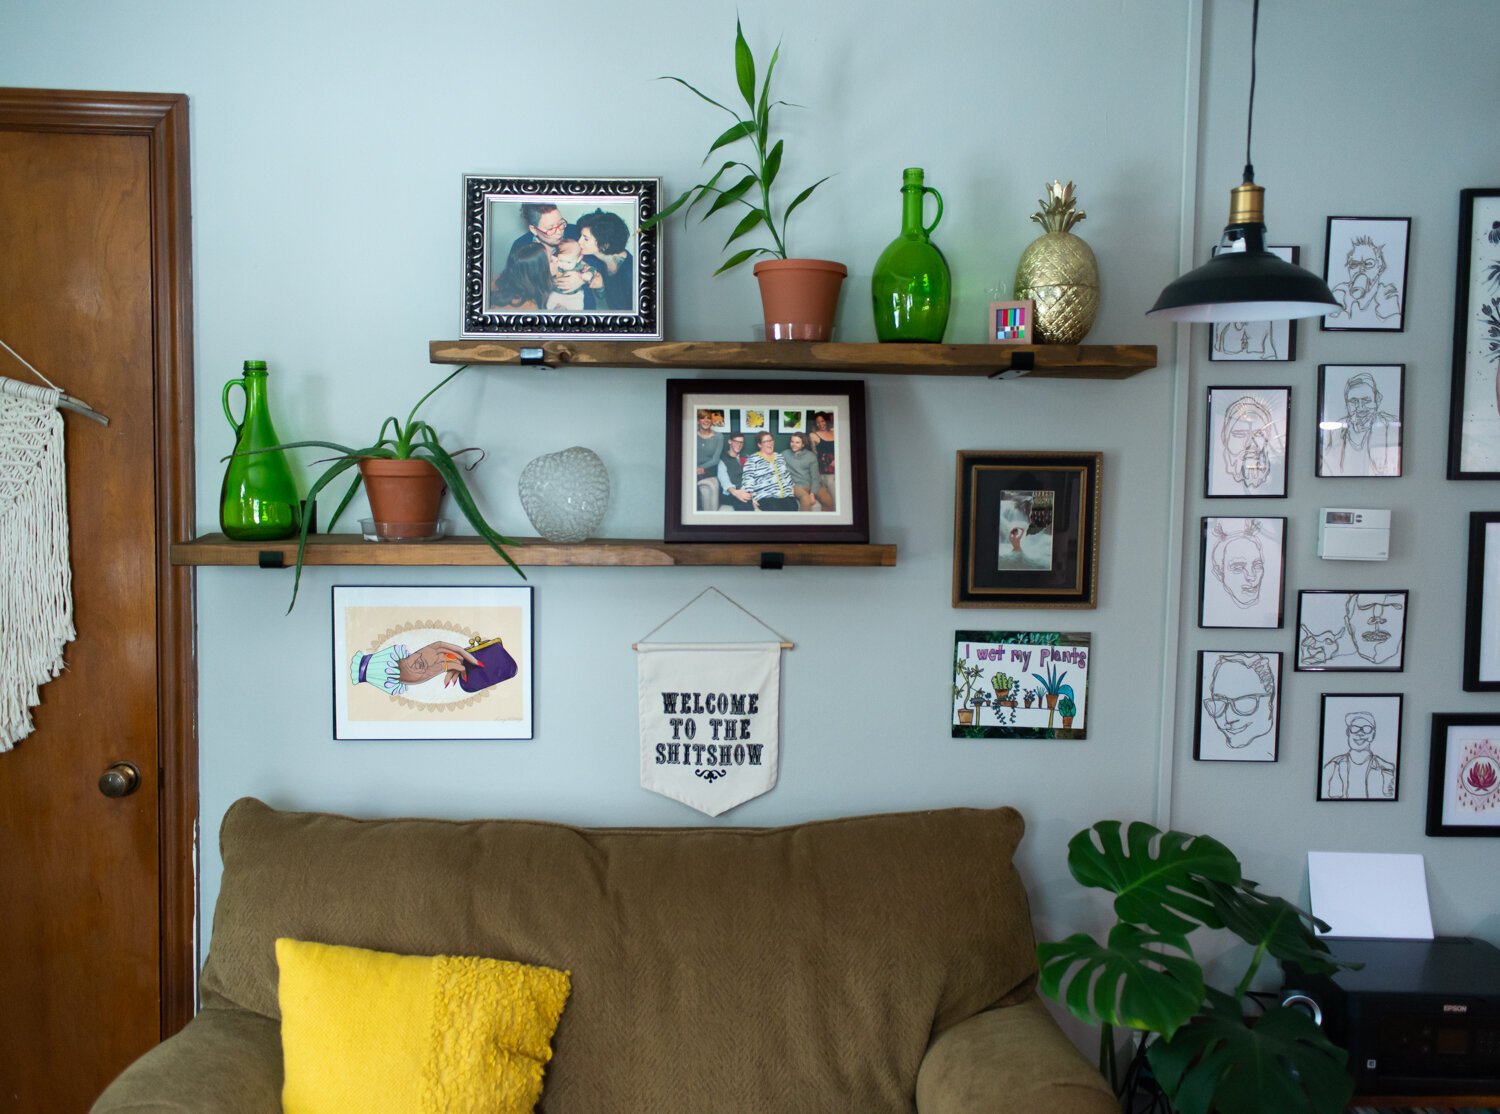 Floating shelves are a feature at the home of Katie Jo and Tobi Newson.